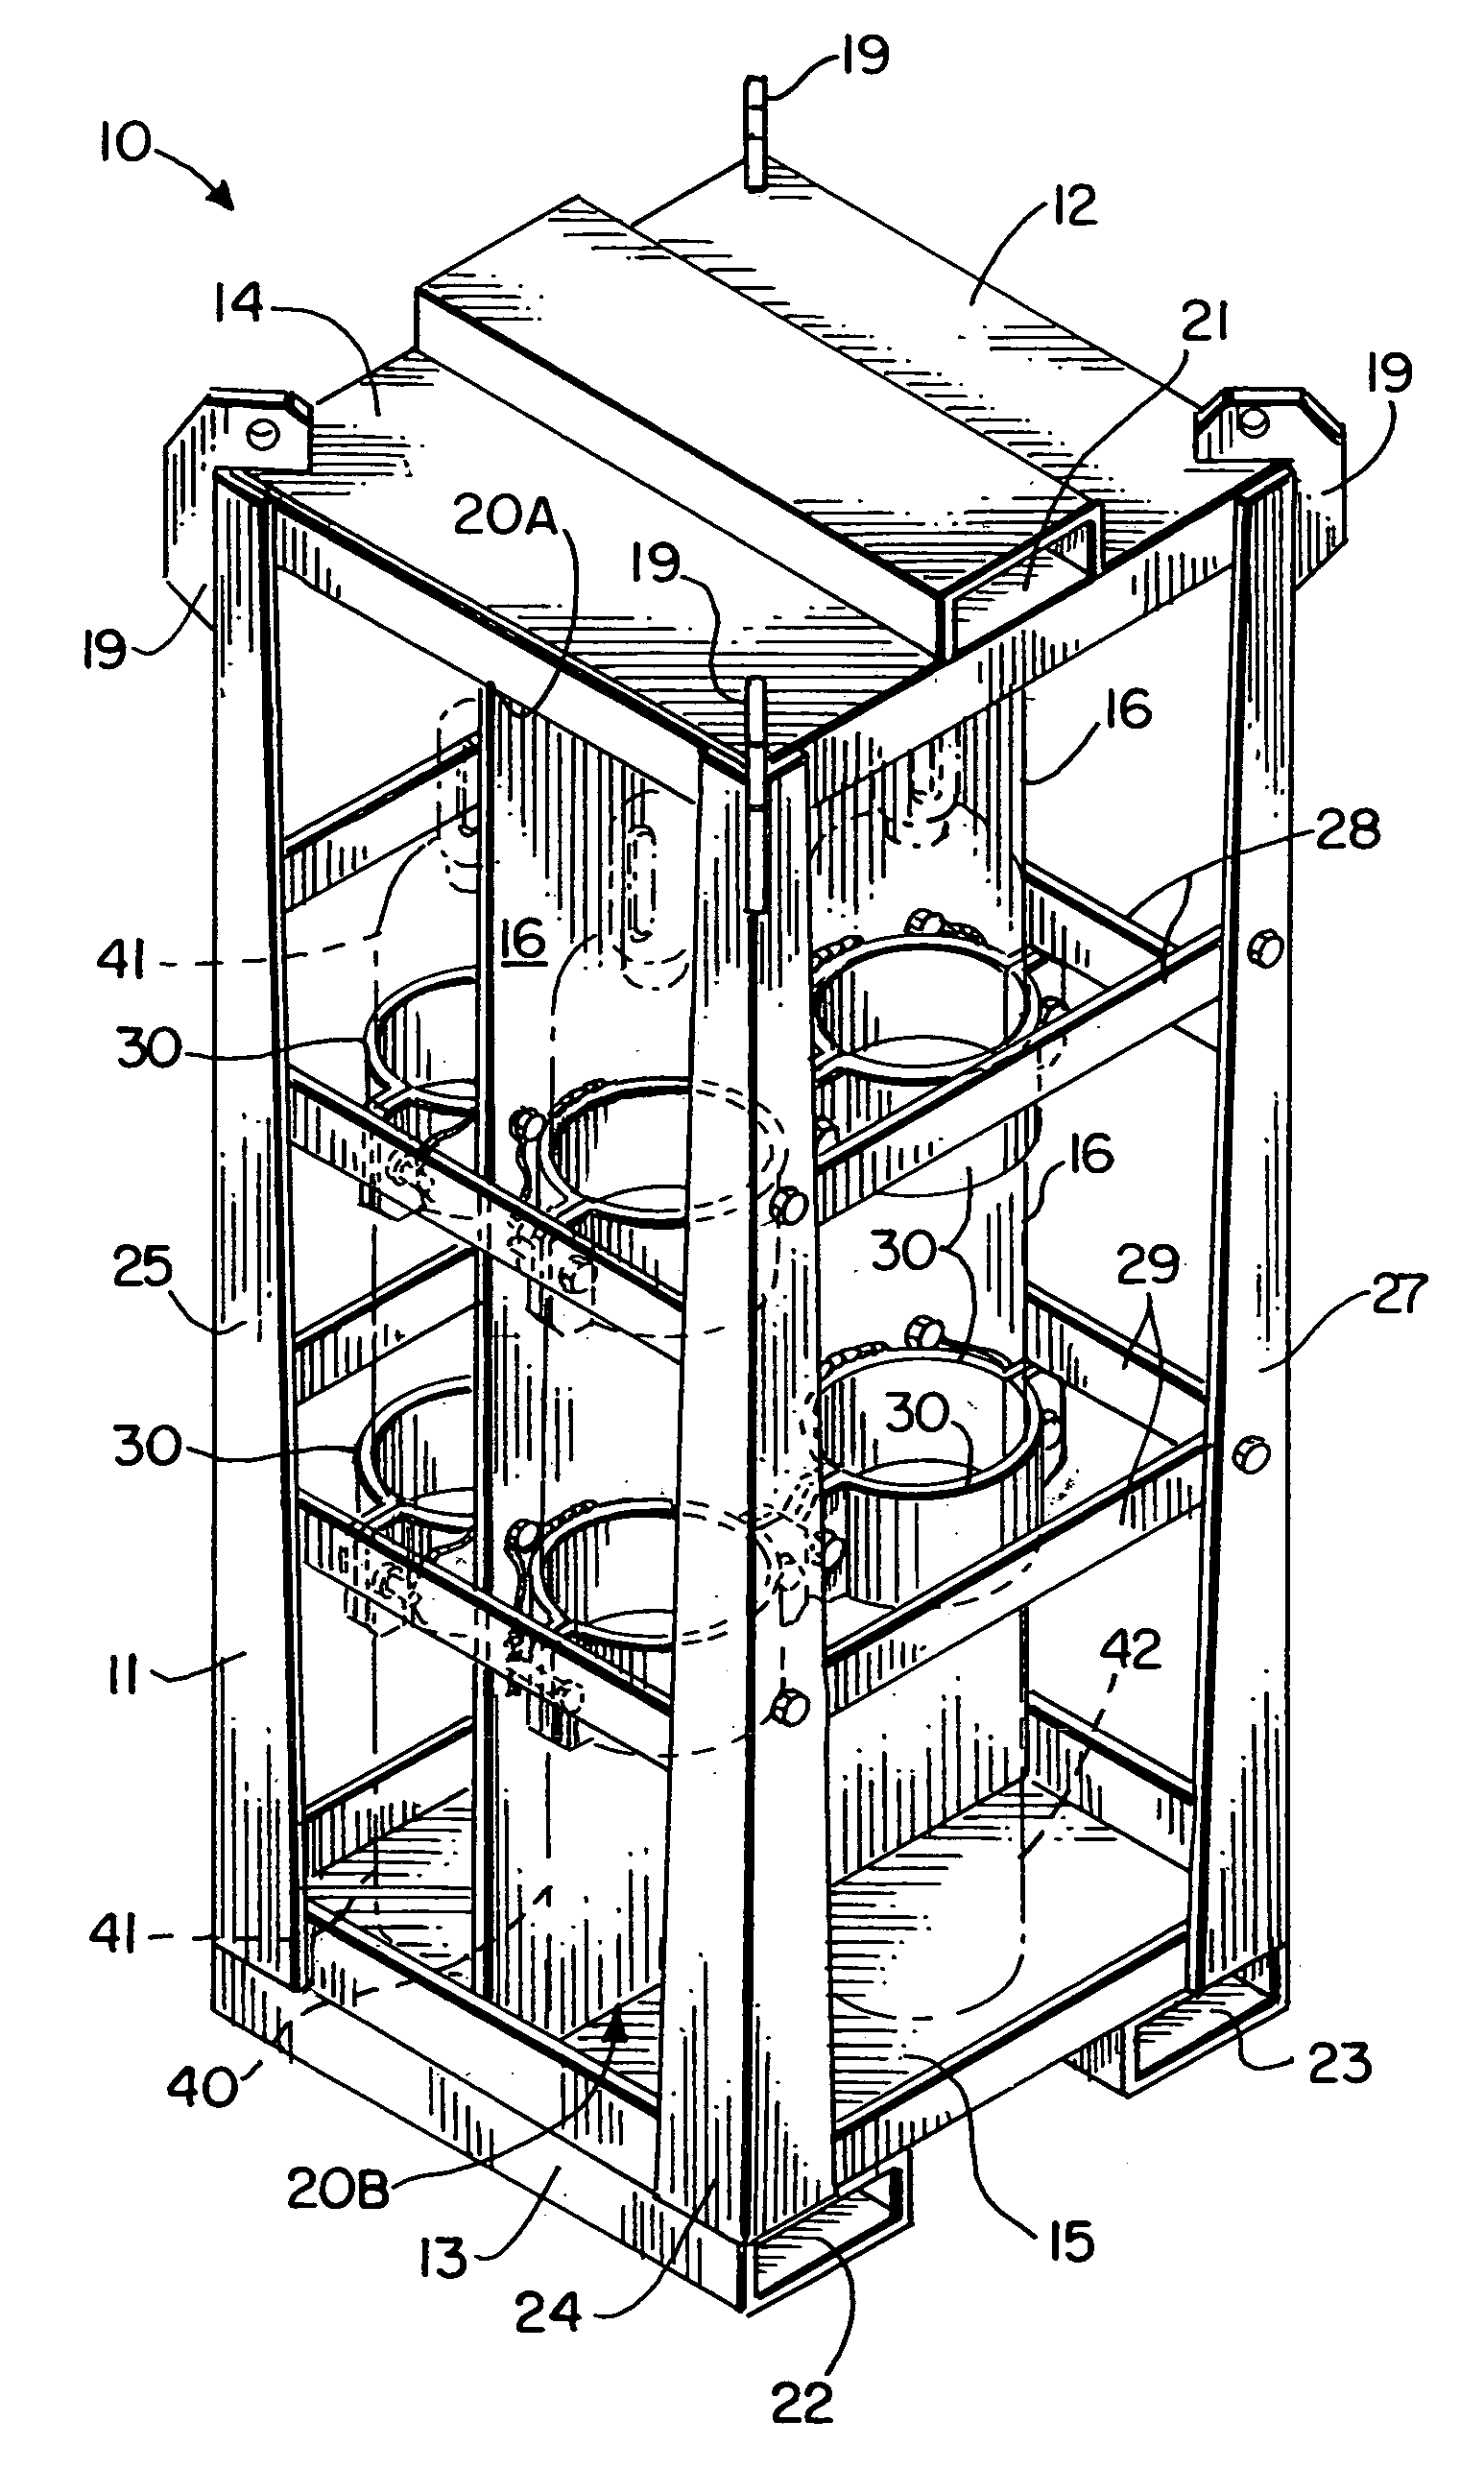 Method and apparatus for transporting pressurized gas canisters